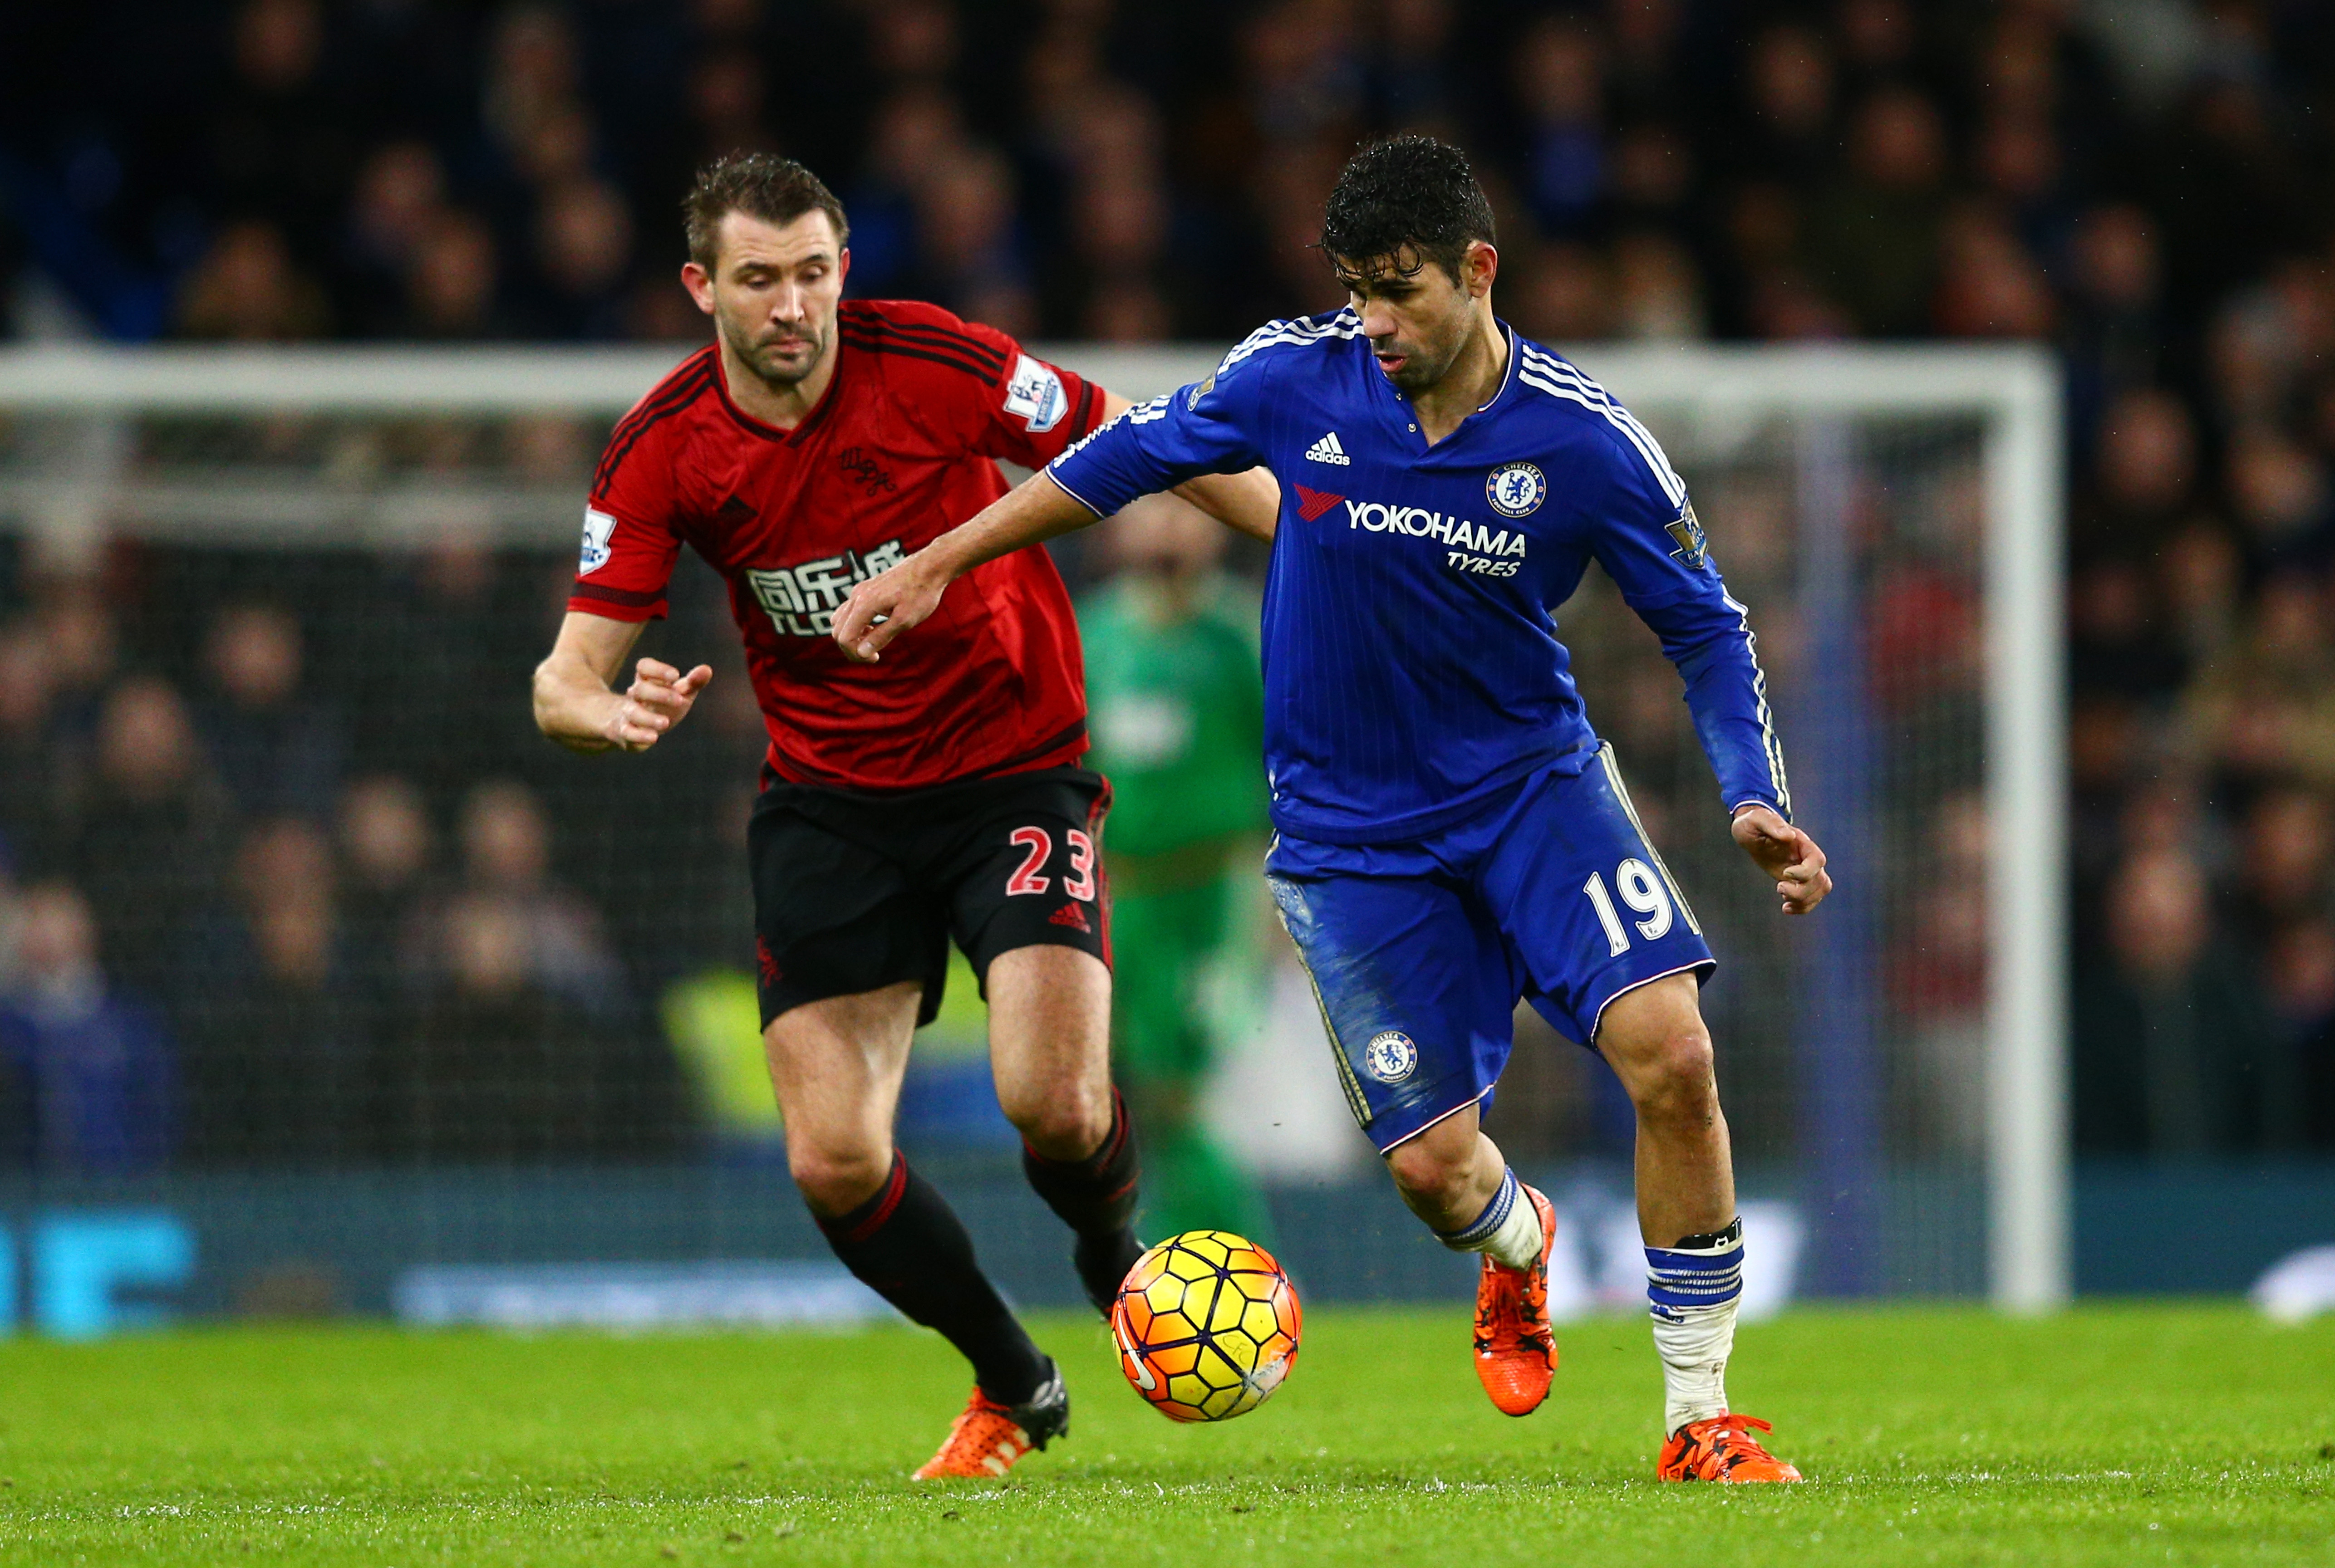 LONDON, ENGLAND - JANUARY 13: Diego Costa of Chelsea and Gareth McAuley of West Bromwich Albion compete for the ball during the Barclays Premier League match between Chelsea and West Bromwich Albion at Stamford Bridge on January 13, 2016 in London, England.  (Photo by Clive Mason/Getty Images)